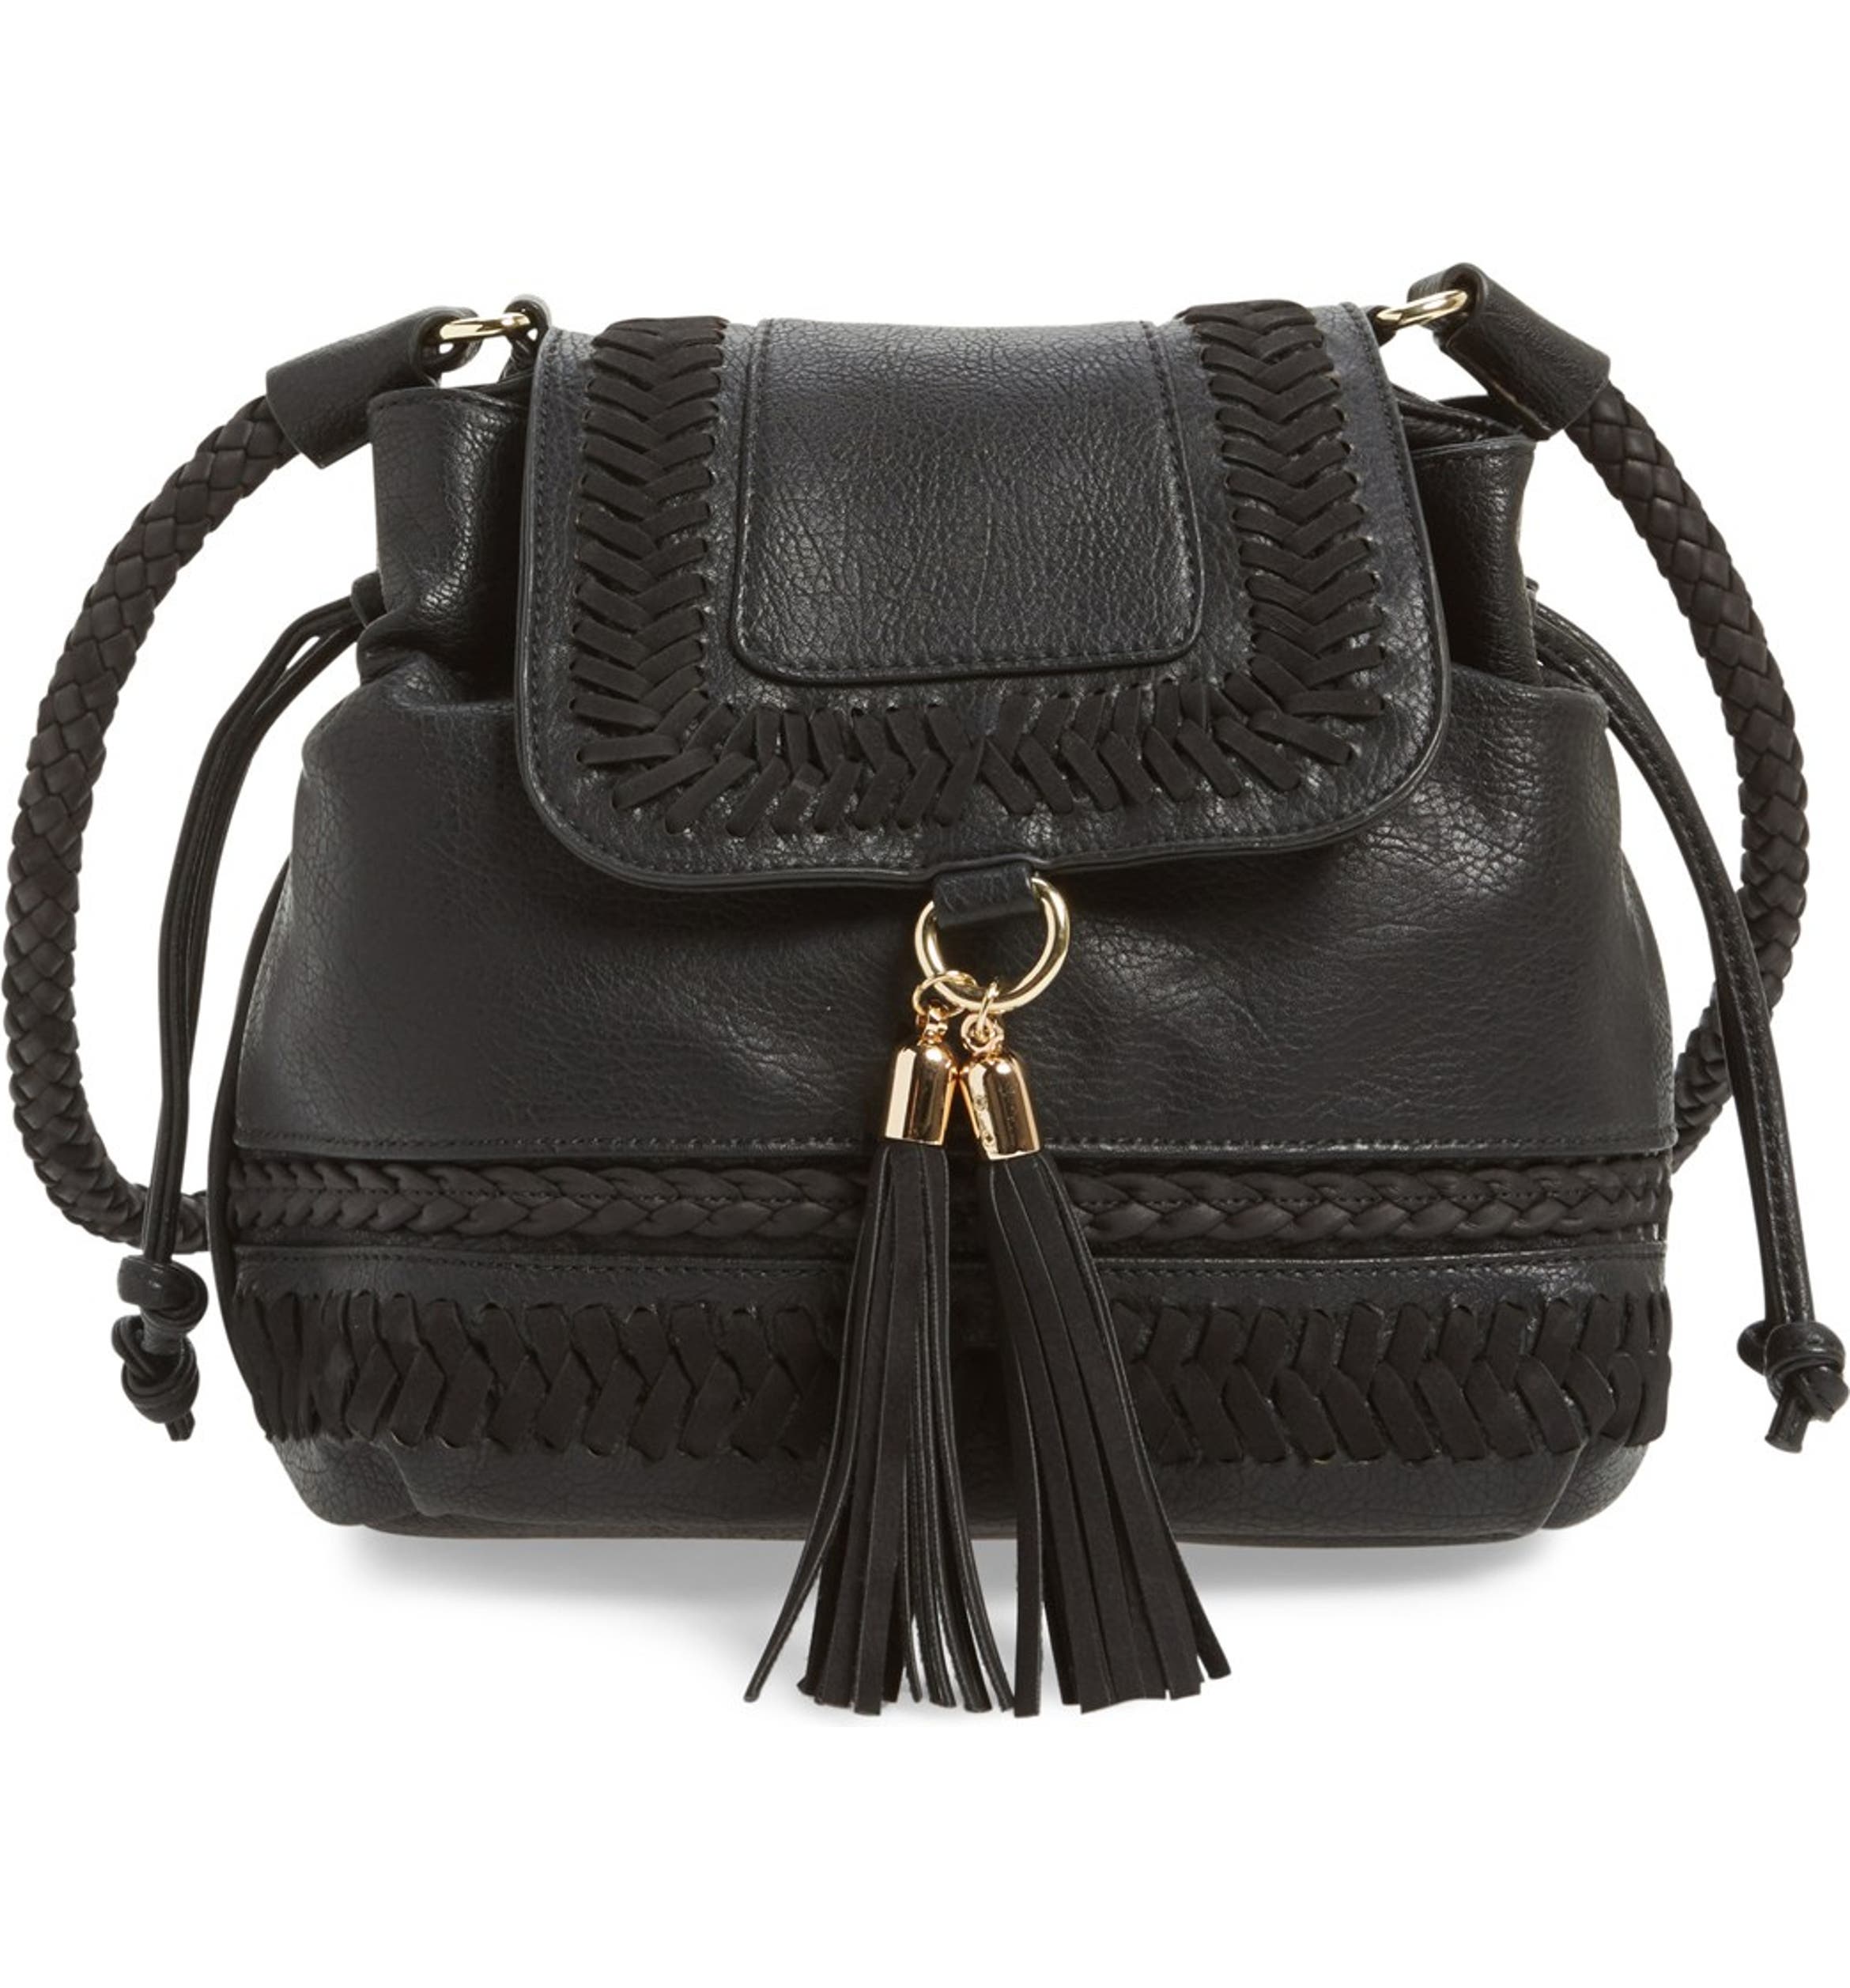 Emperia 'Phoebe' Faux Leather Crossbody Bag | Nordstrom